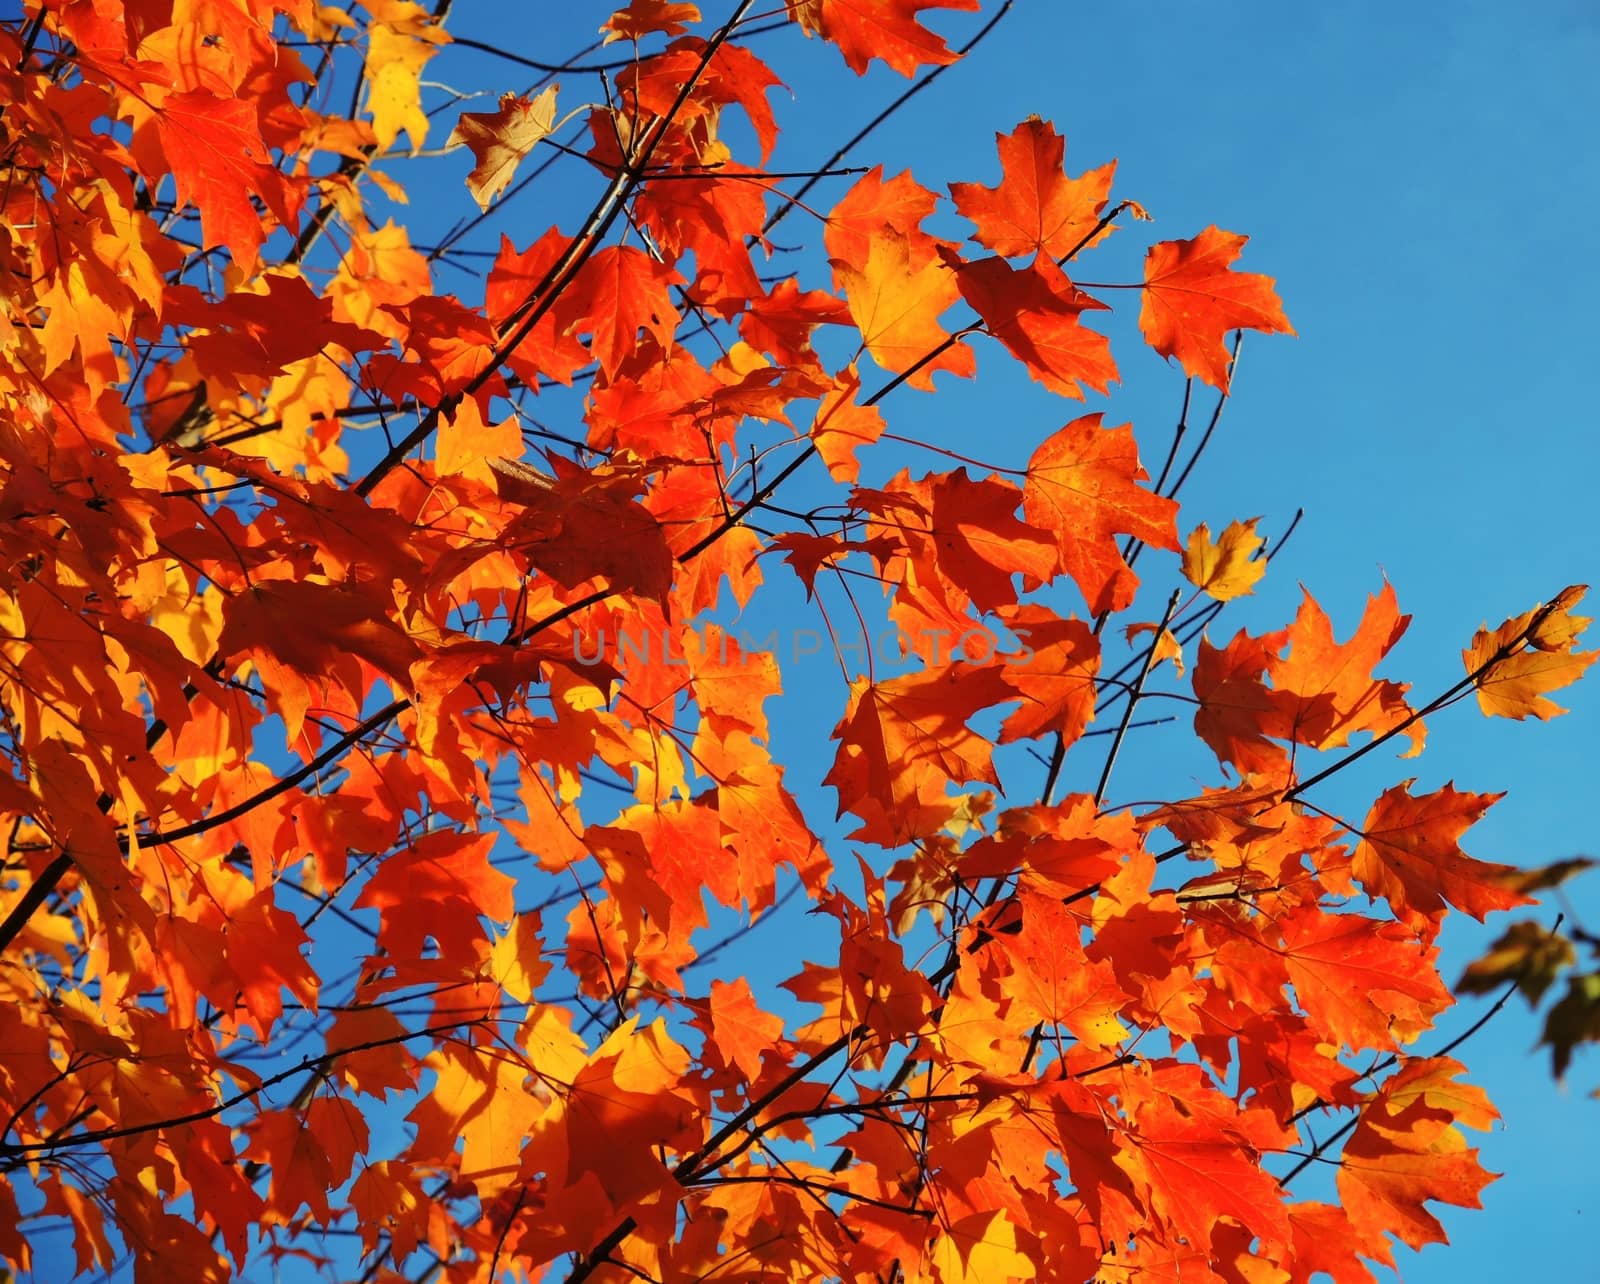 A close-up image of colourful Autumn leaves against a clear blue sky.